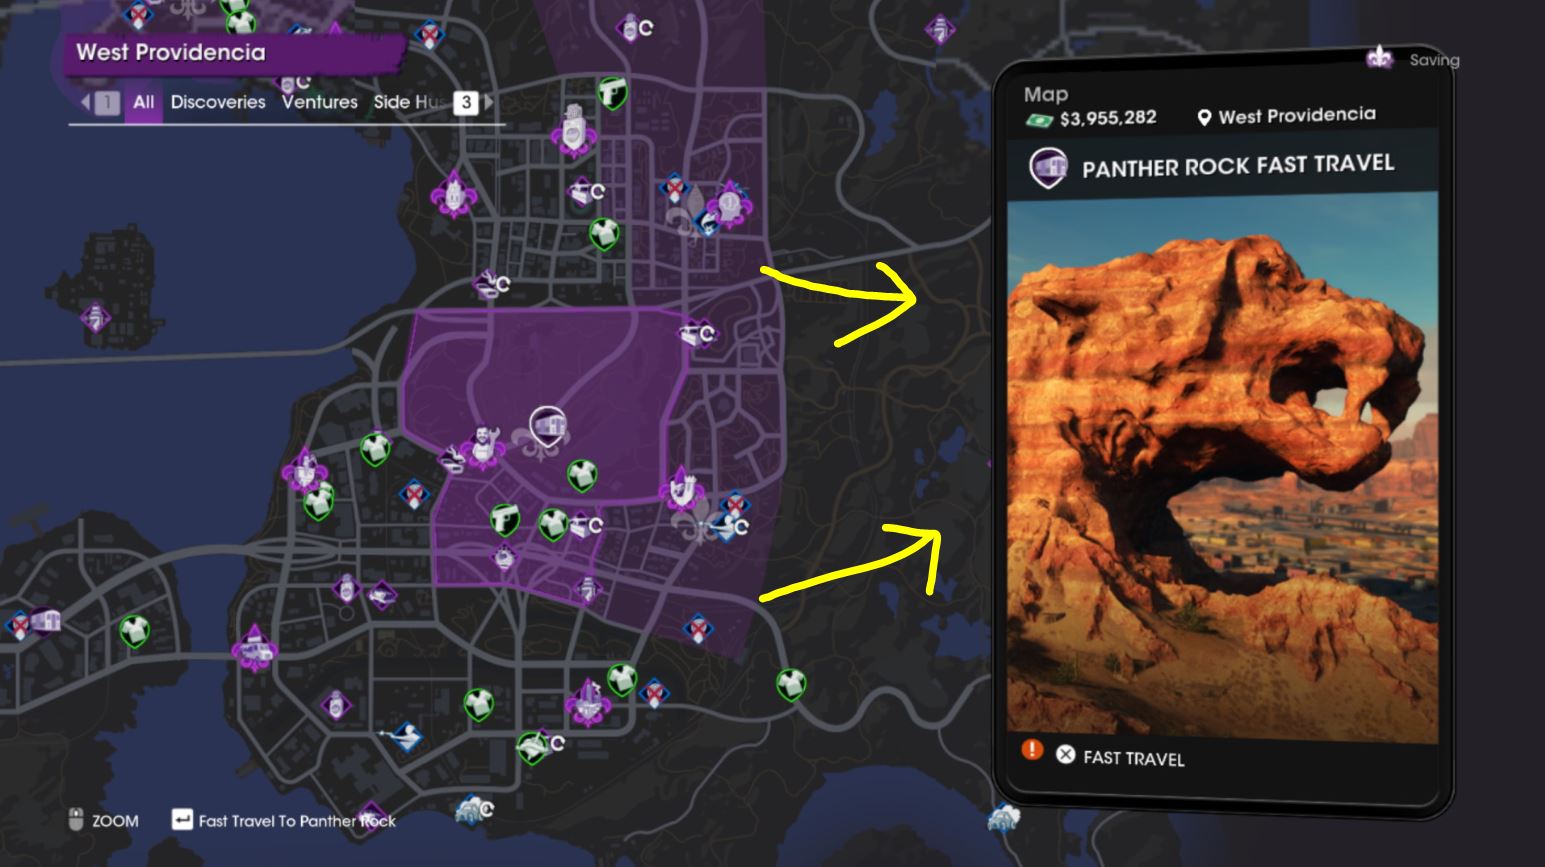 SAints Row 2022 game reboot panther rock fast travel location on map